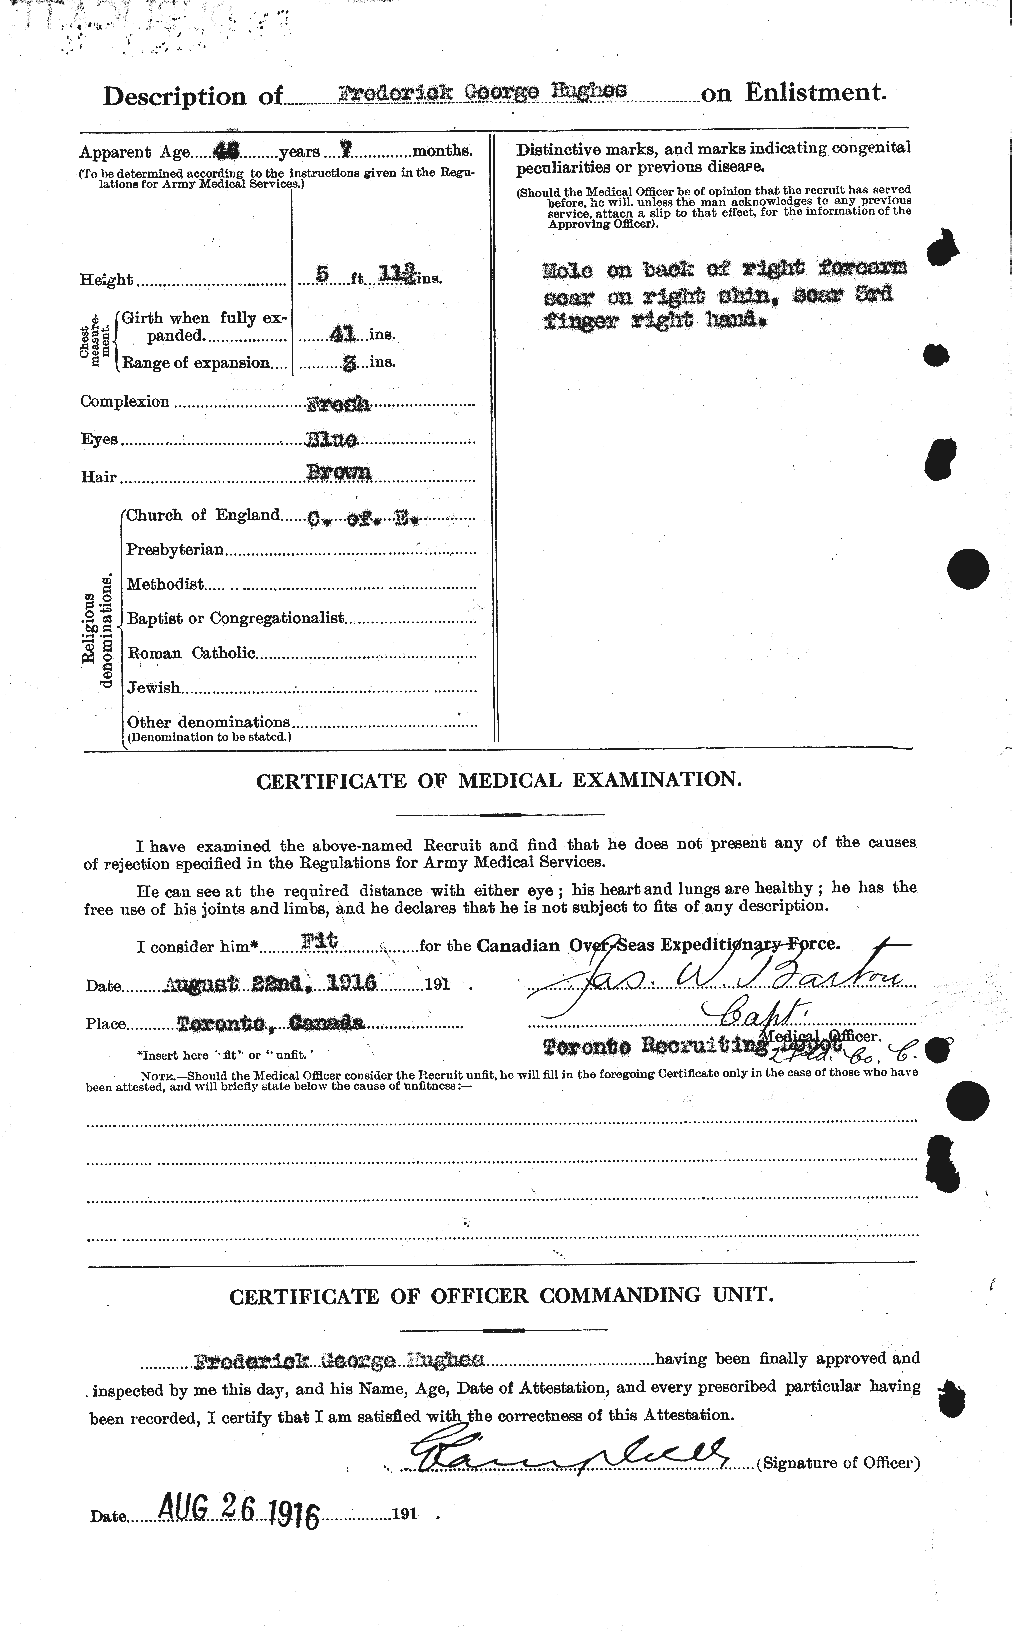 Personnel Records of the First World War - CEF 403798b